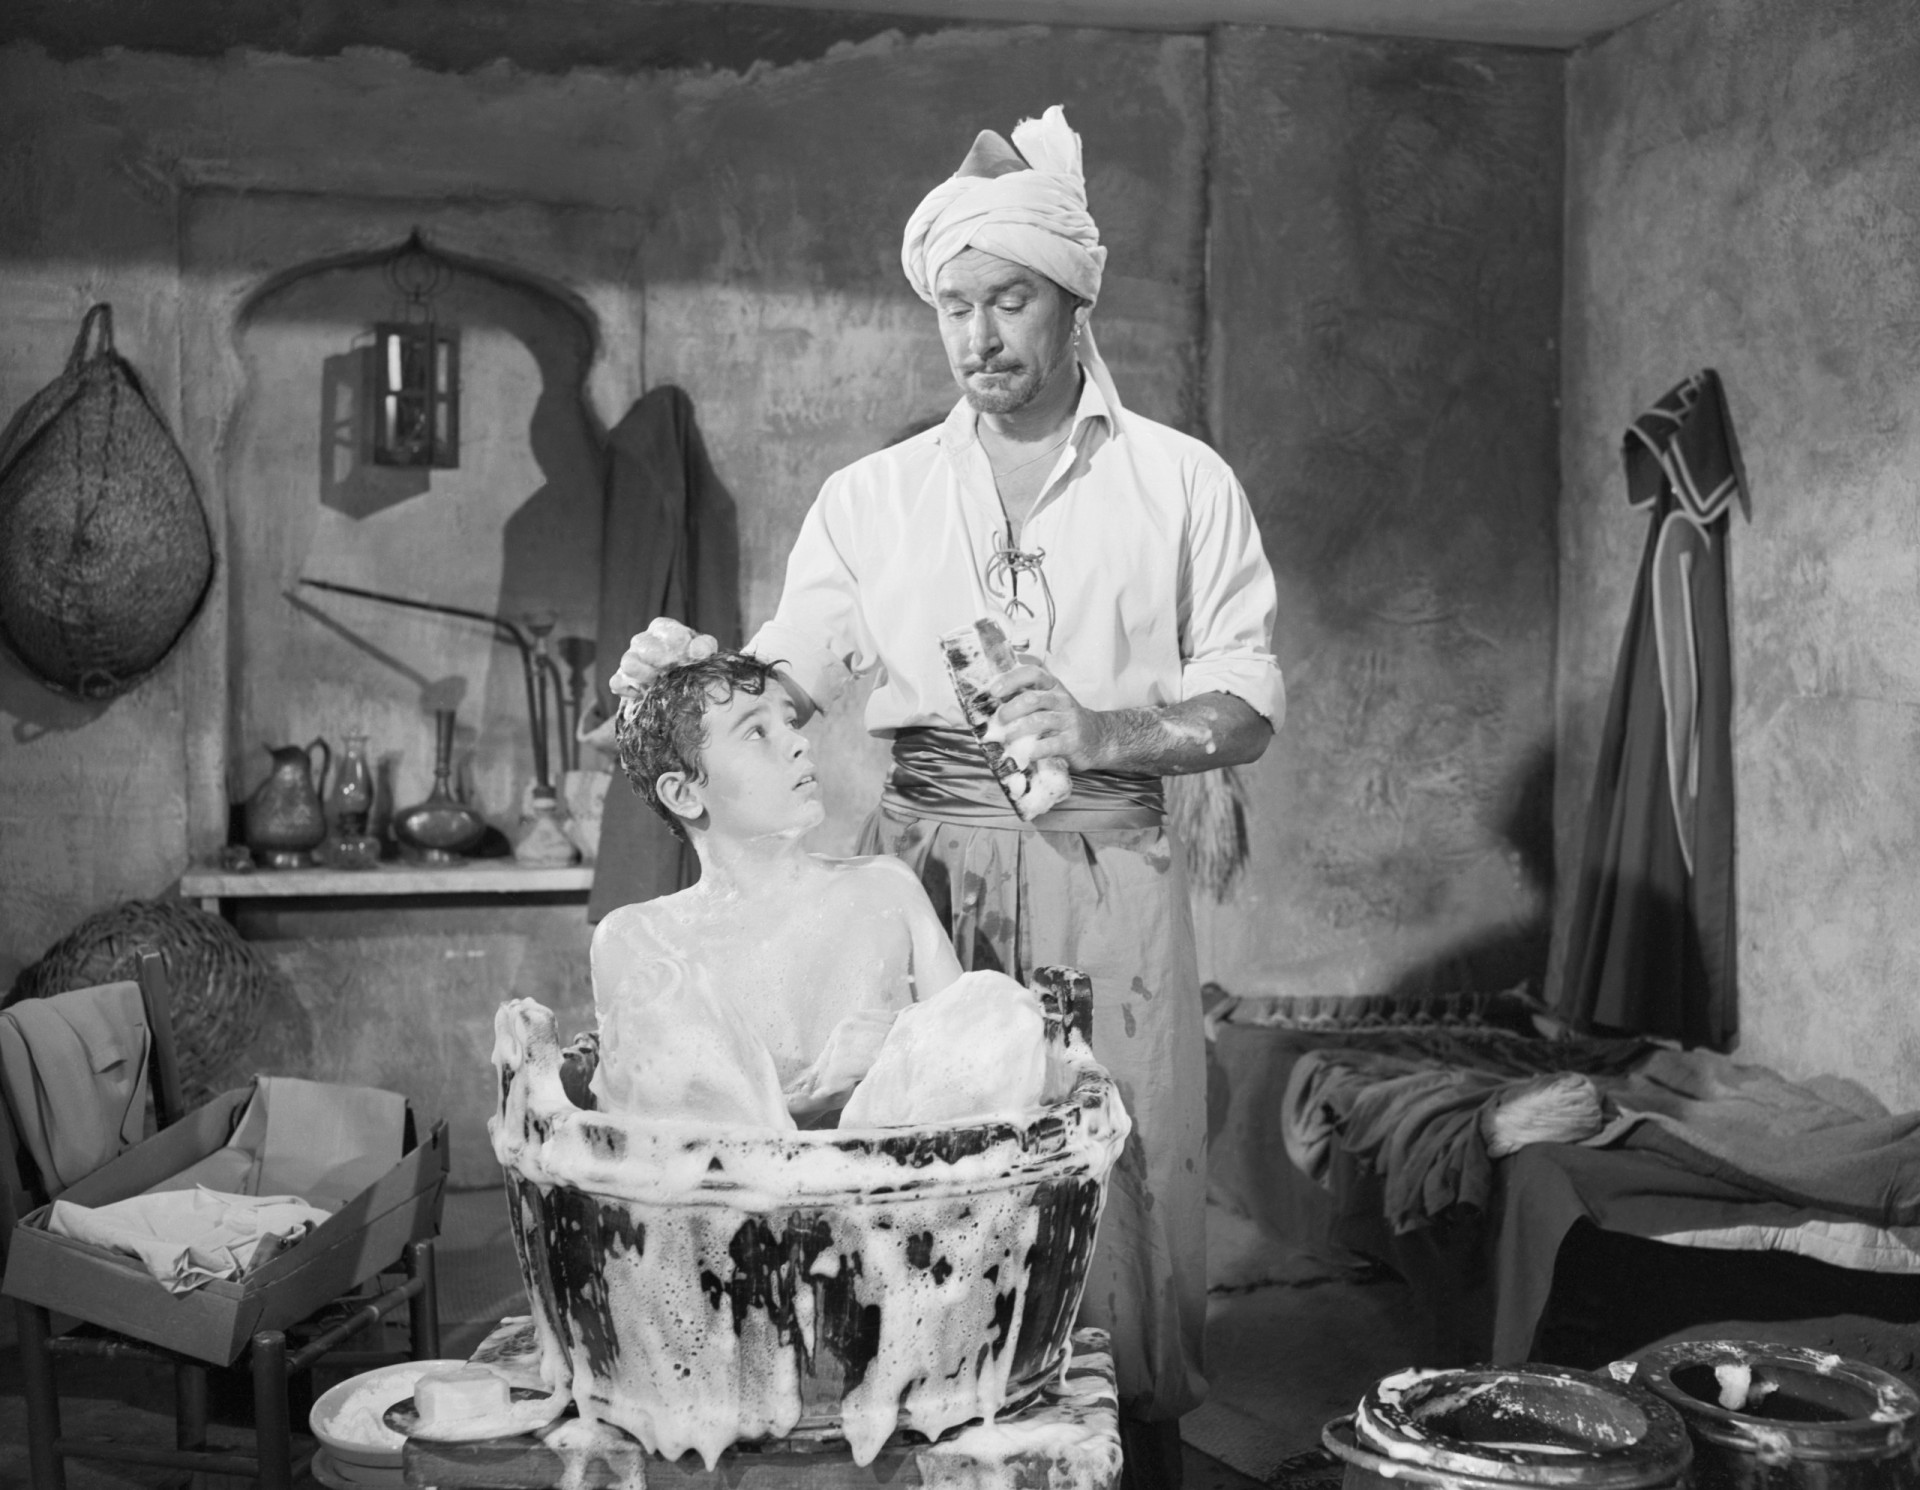 <p>Mahbub Ali (Errol Flynn) gives Kim (Dean Stockwell) a bubble bath in a scene from the 1950 adventure film 'Kim.' The movie was partly shot on location in India.</p><p>You may also like:<a href="https://www.starsinsider.com/n/391353?utm_source=msn.com&utm_medium=display&utm_campaign=referral_description&utm_content=546036en-en"> Madonna: the life and career of the 'Material Girl'</a></p>